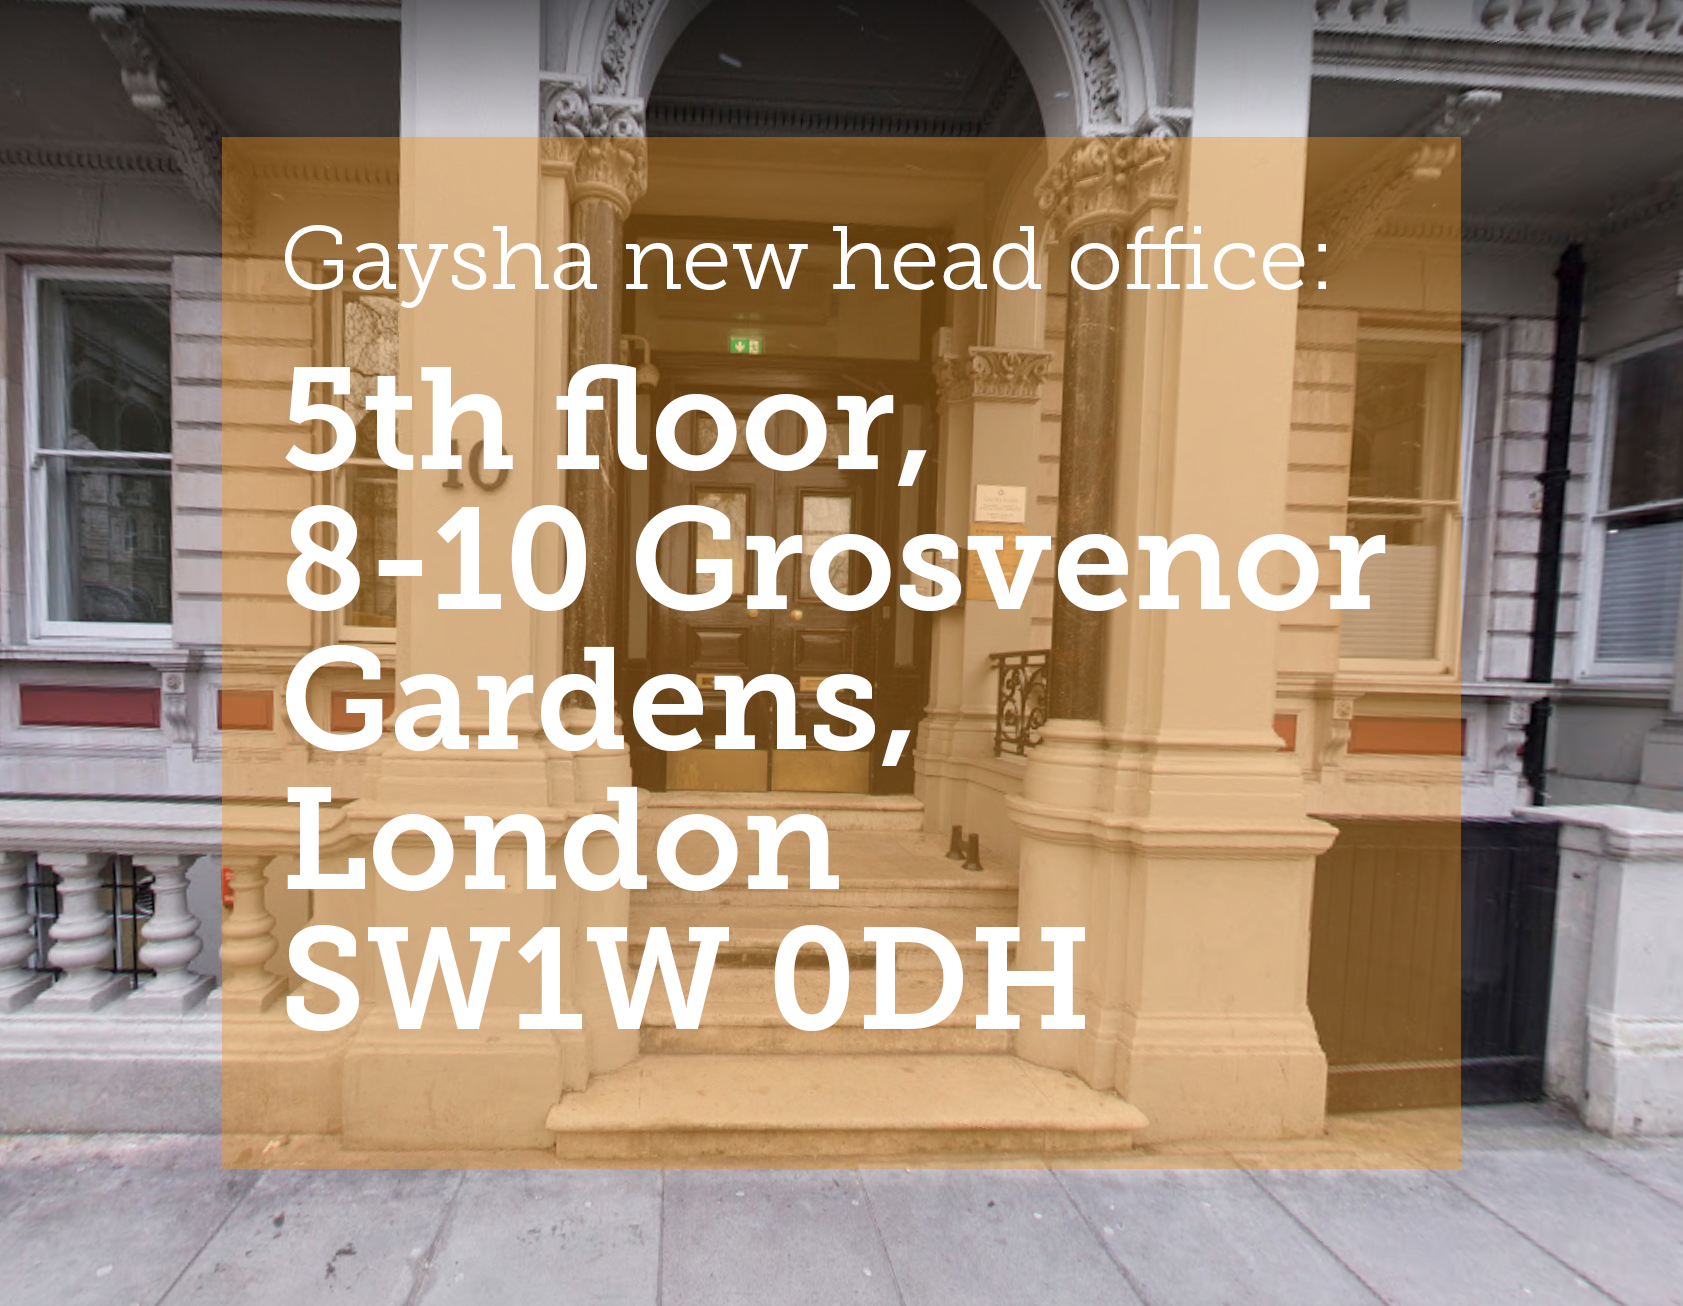 Gaysha moves to a new head office in Belgravia